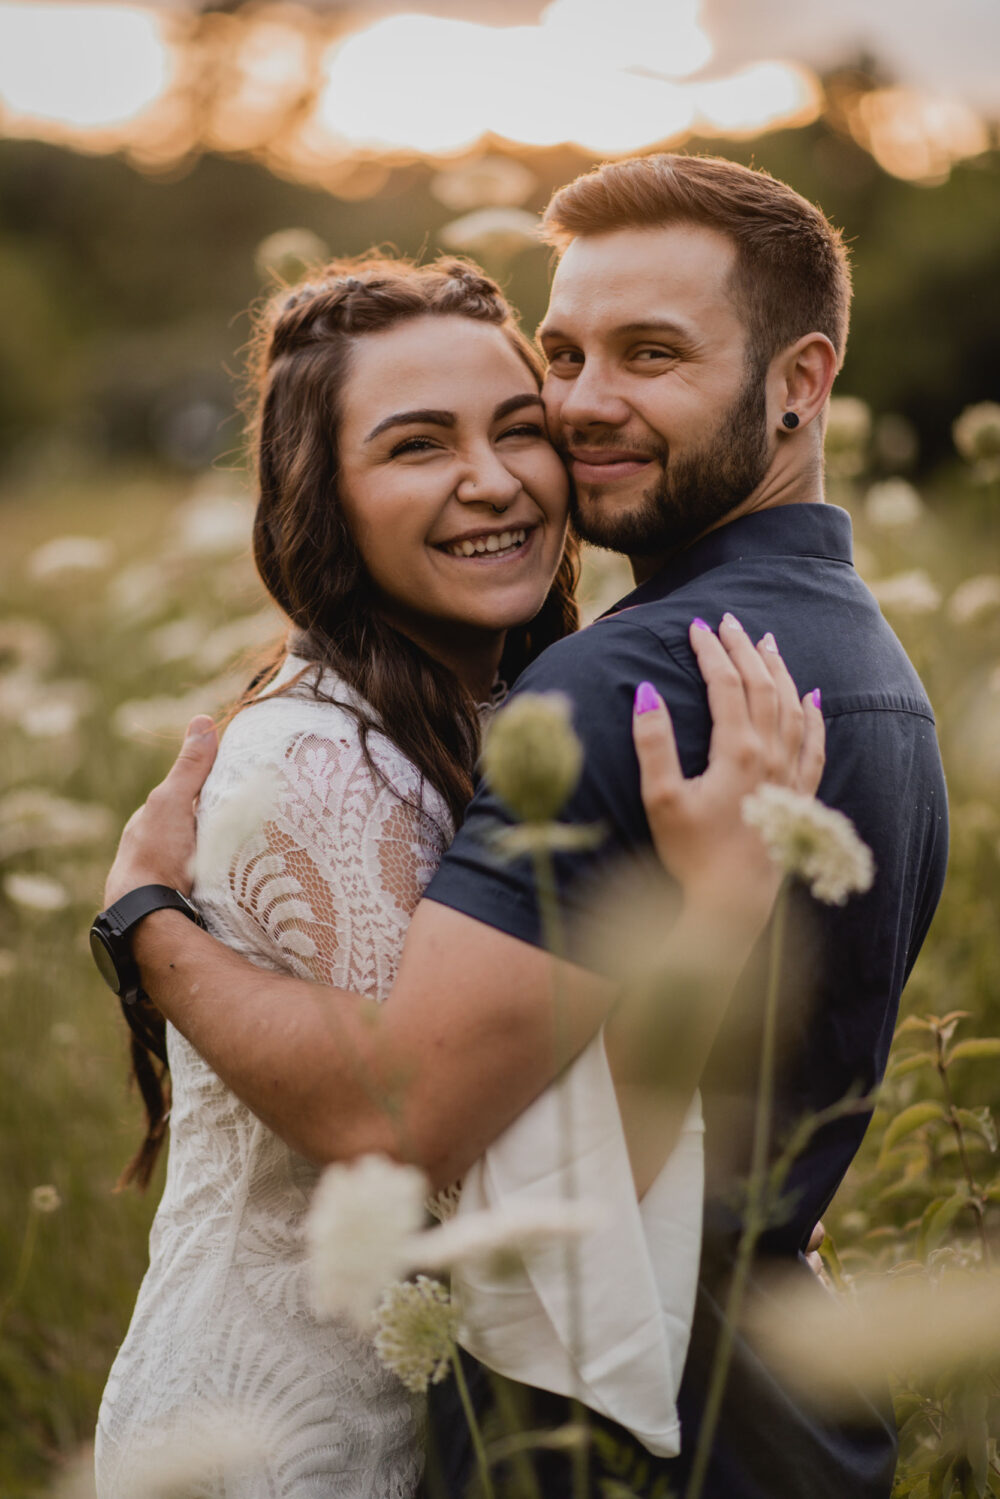 queen anne's lace engagement photography